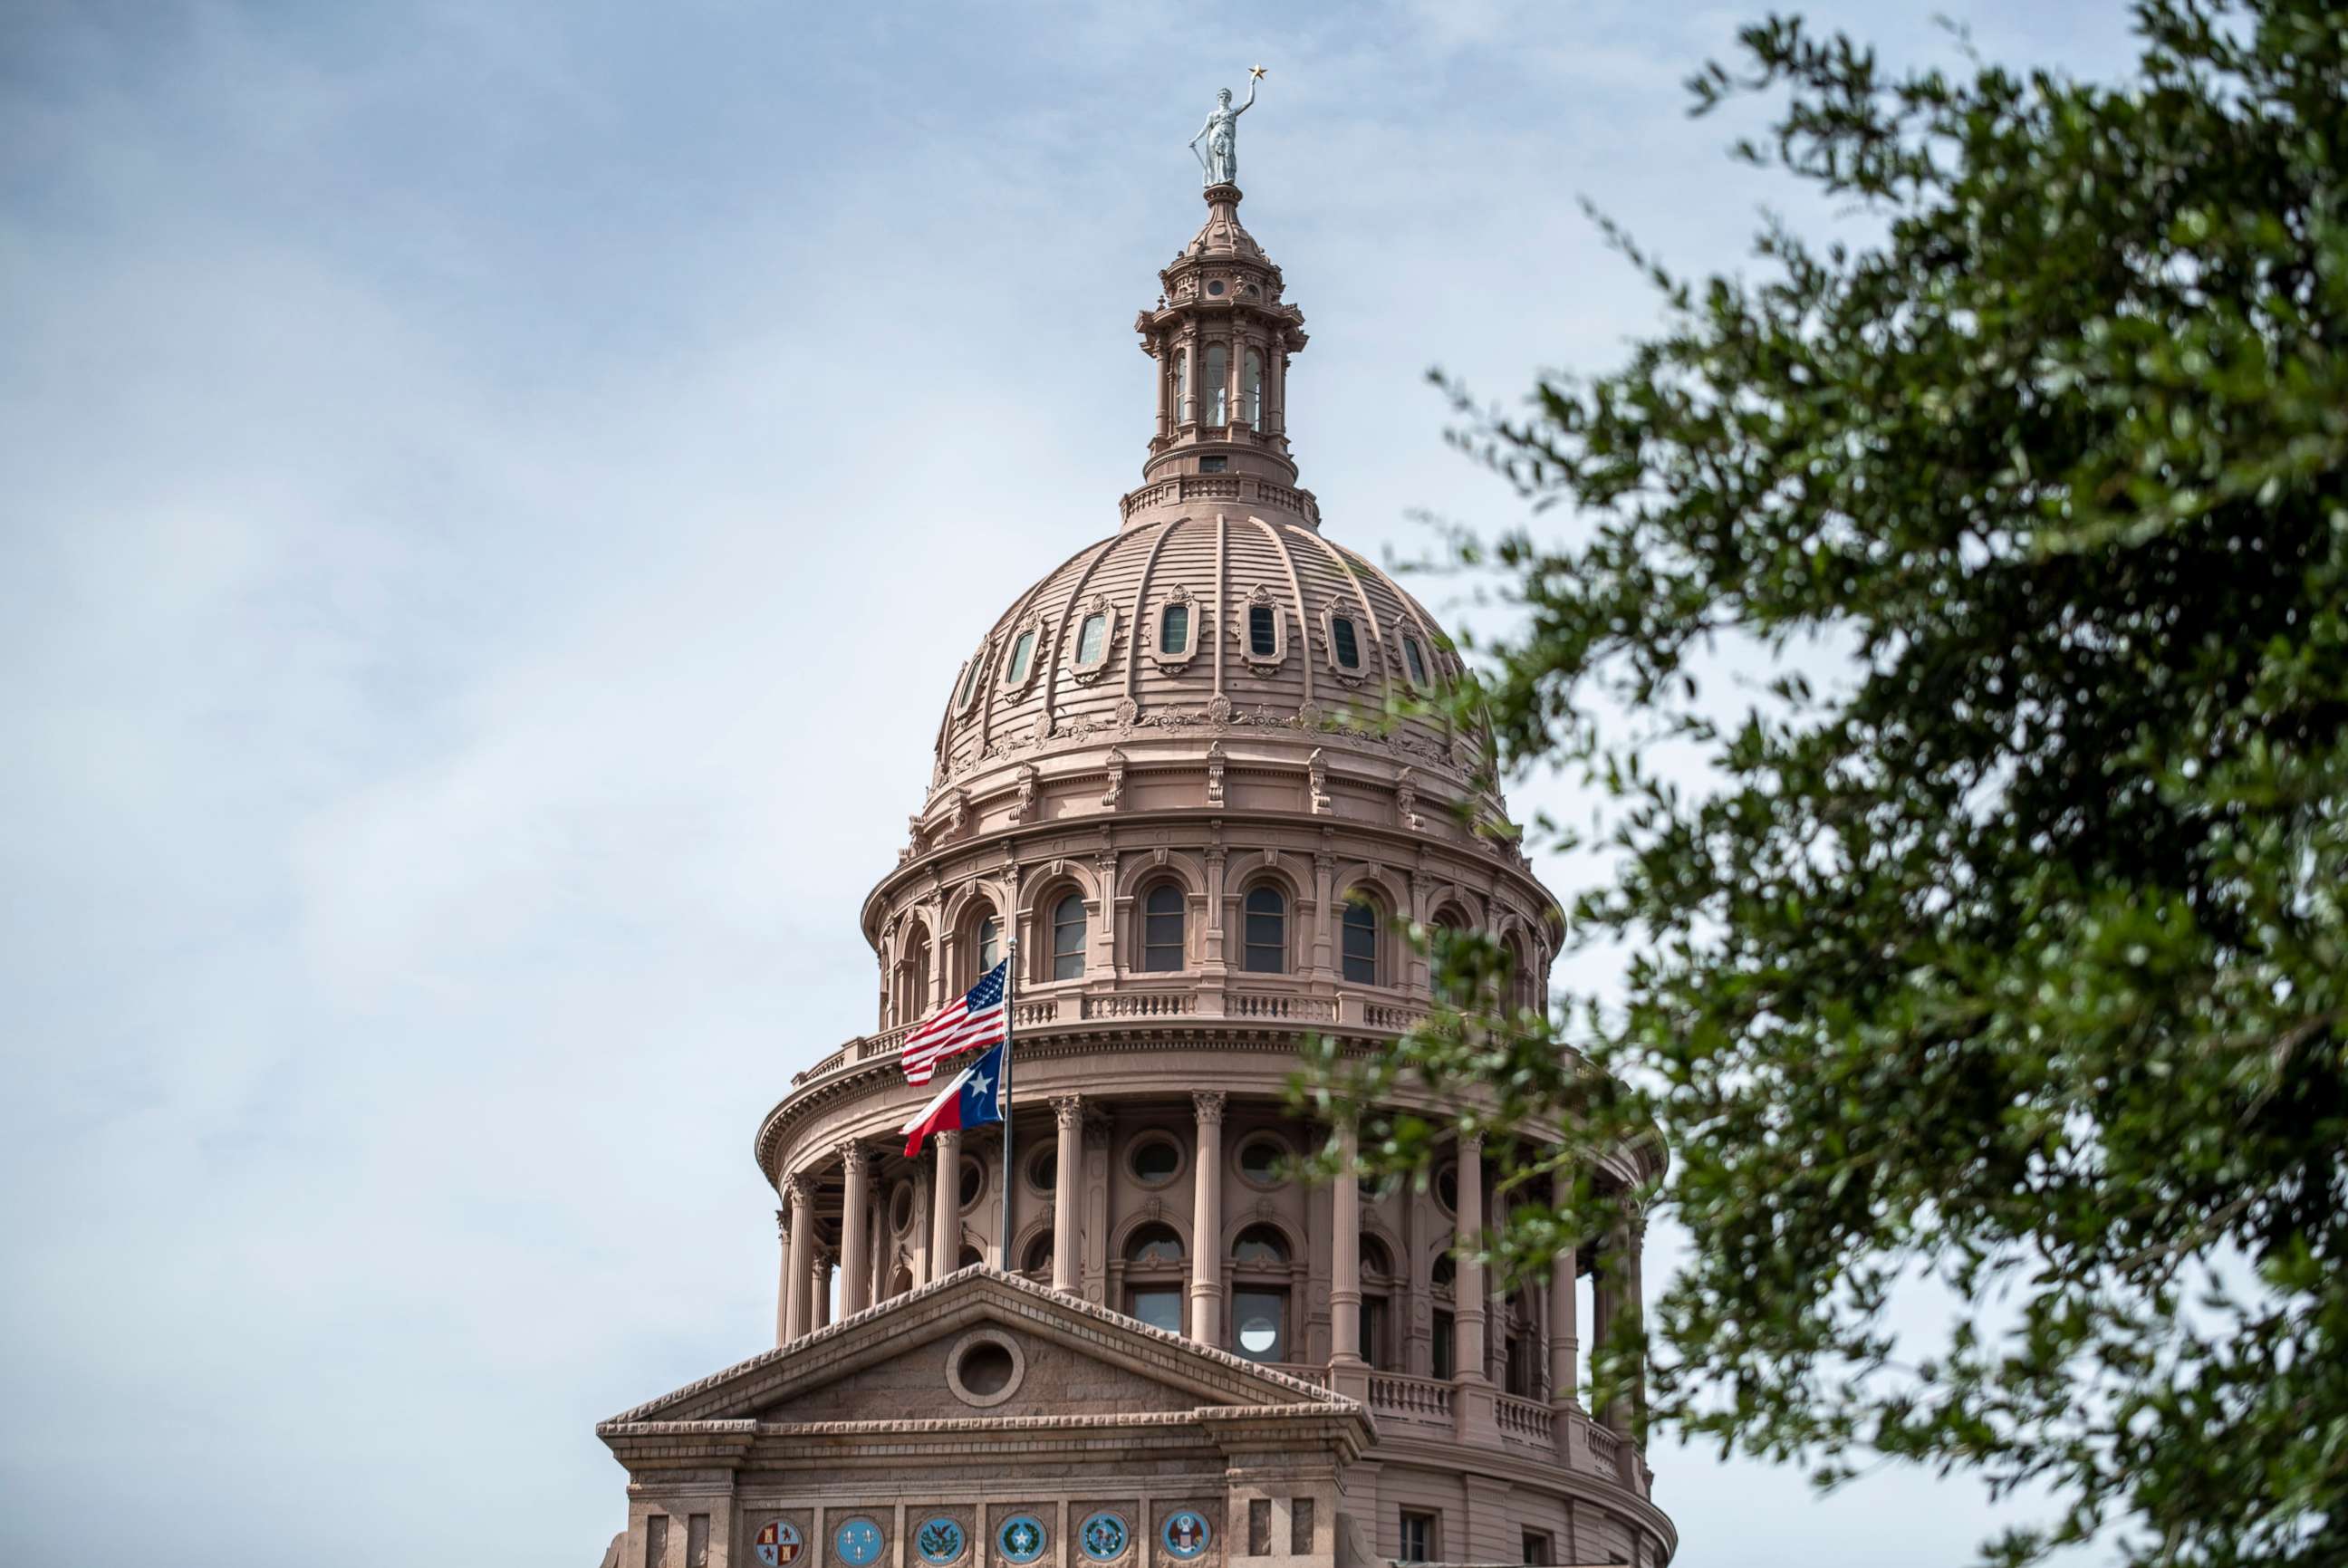 PHOTO: In this July 12, 2021, file photo, the U.S. and Texas state flags fly outside the state Capitol building in Austin, Texas.